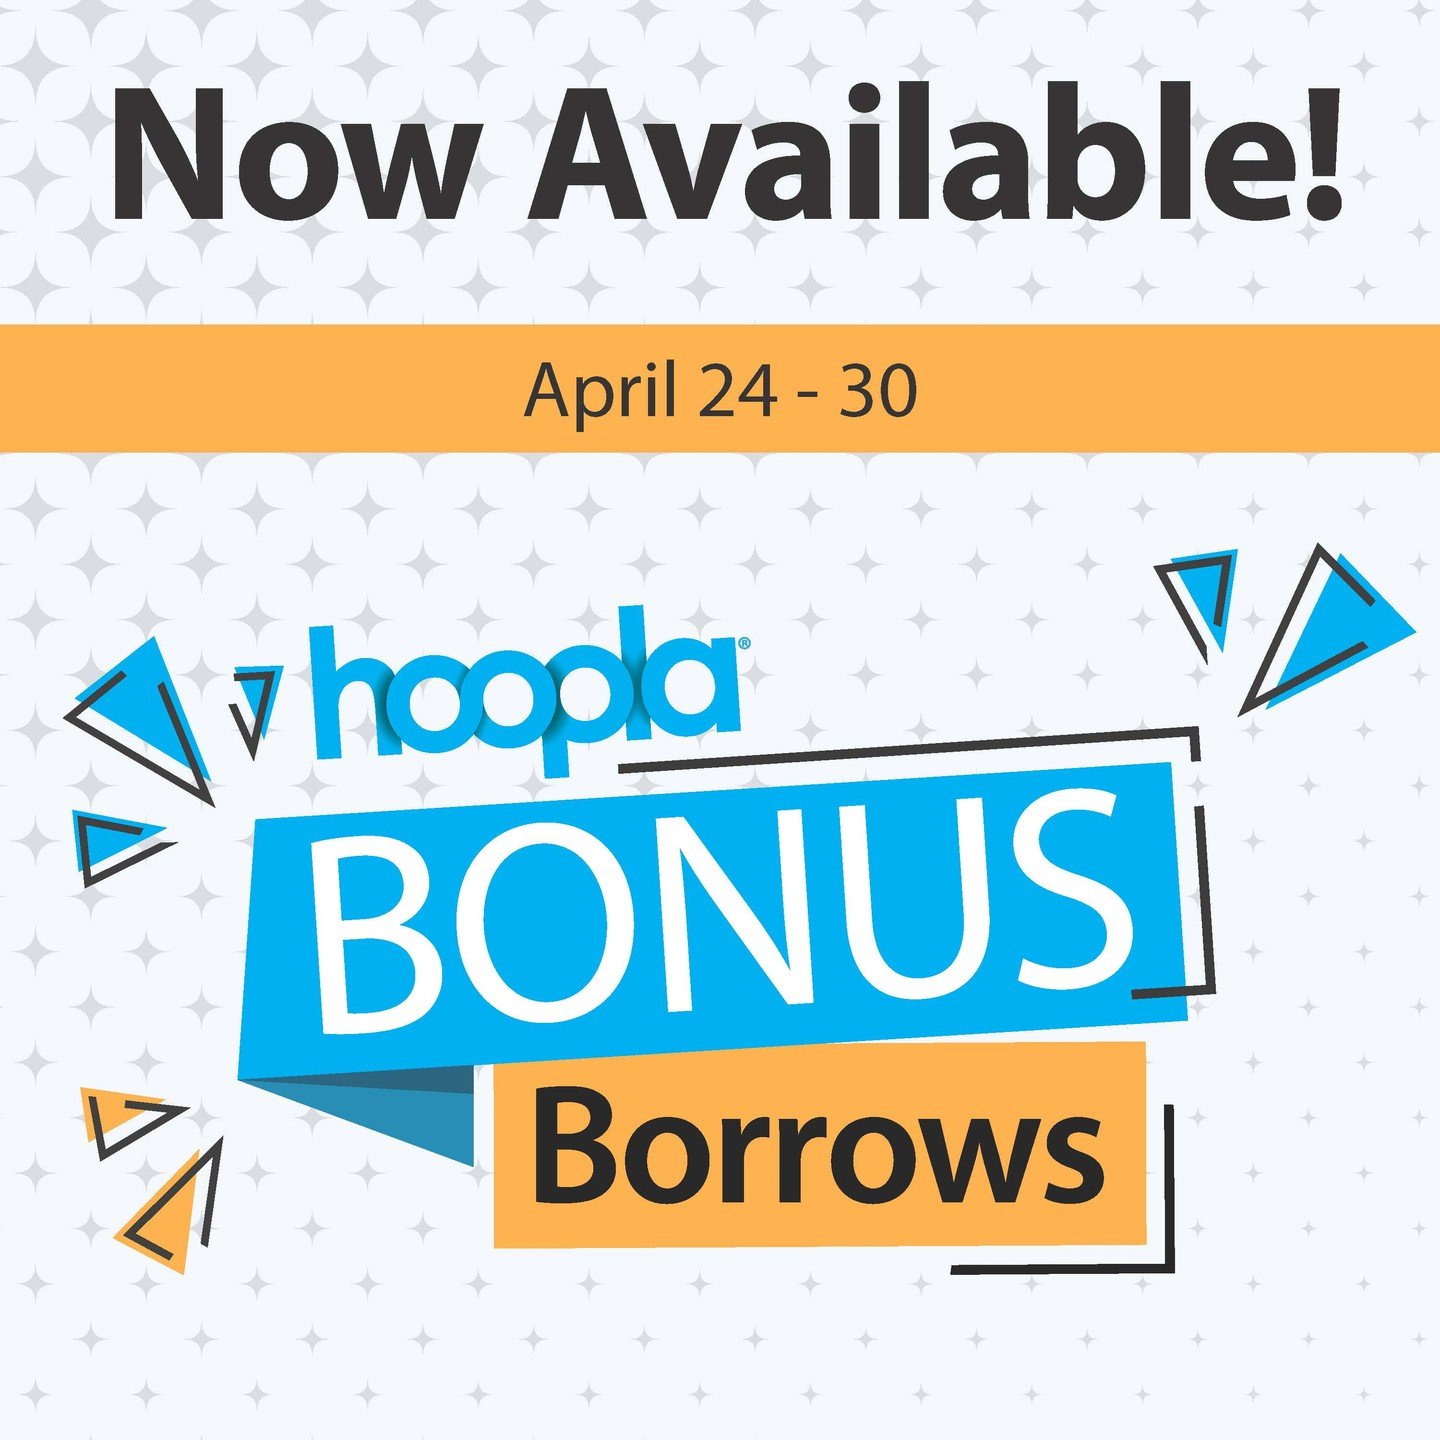 No borrows? No problem! Titles in hoopla's Bonus Borrows program don't count against your limit, and they're available the last seven days of each month. Enjoy hoopla all month long! 🎉

https://www.hoopladigital.com/collection/30266

#hoopla #hoopla